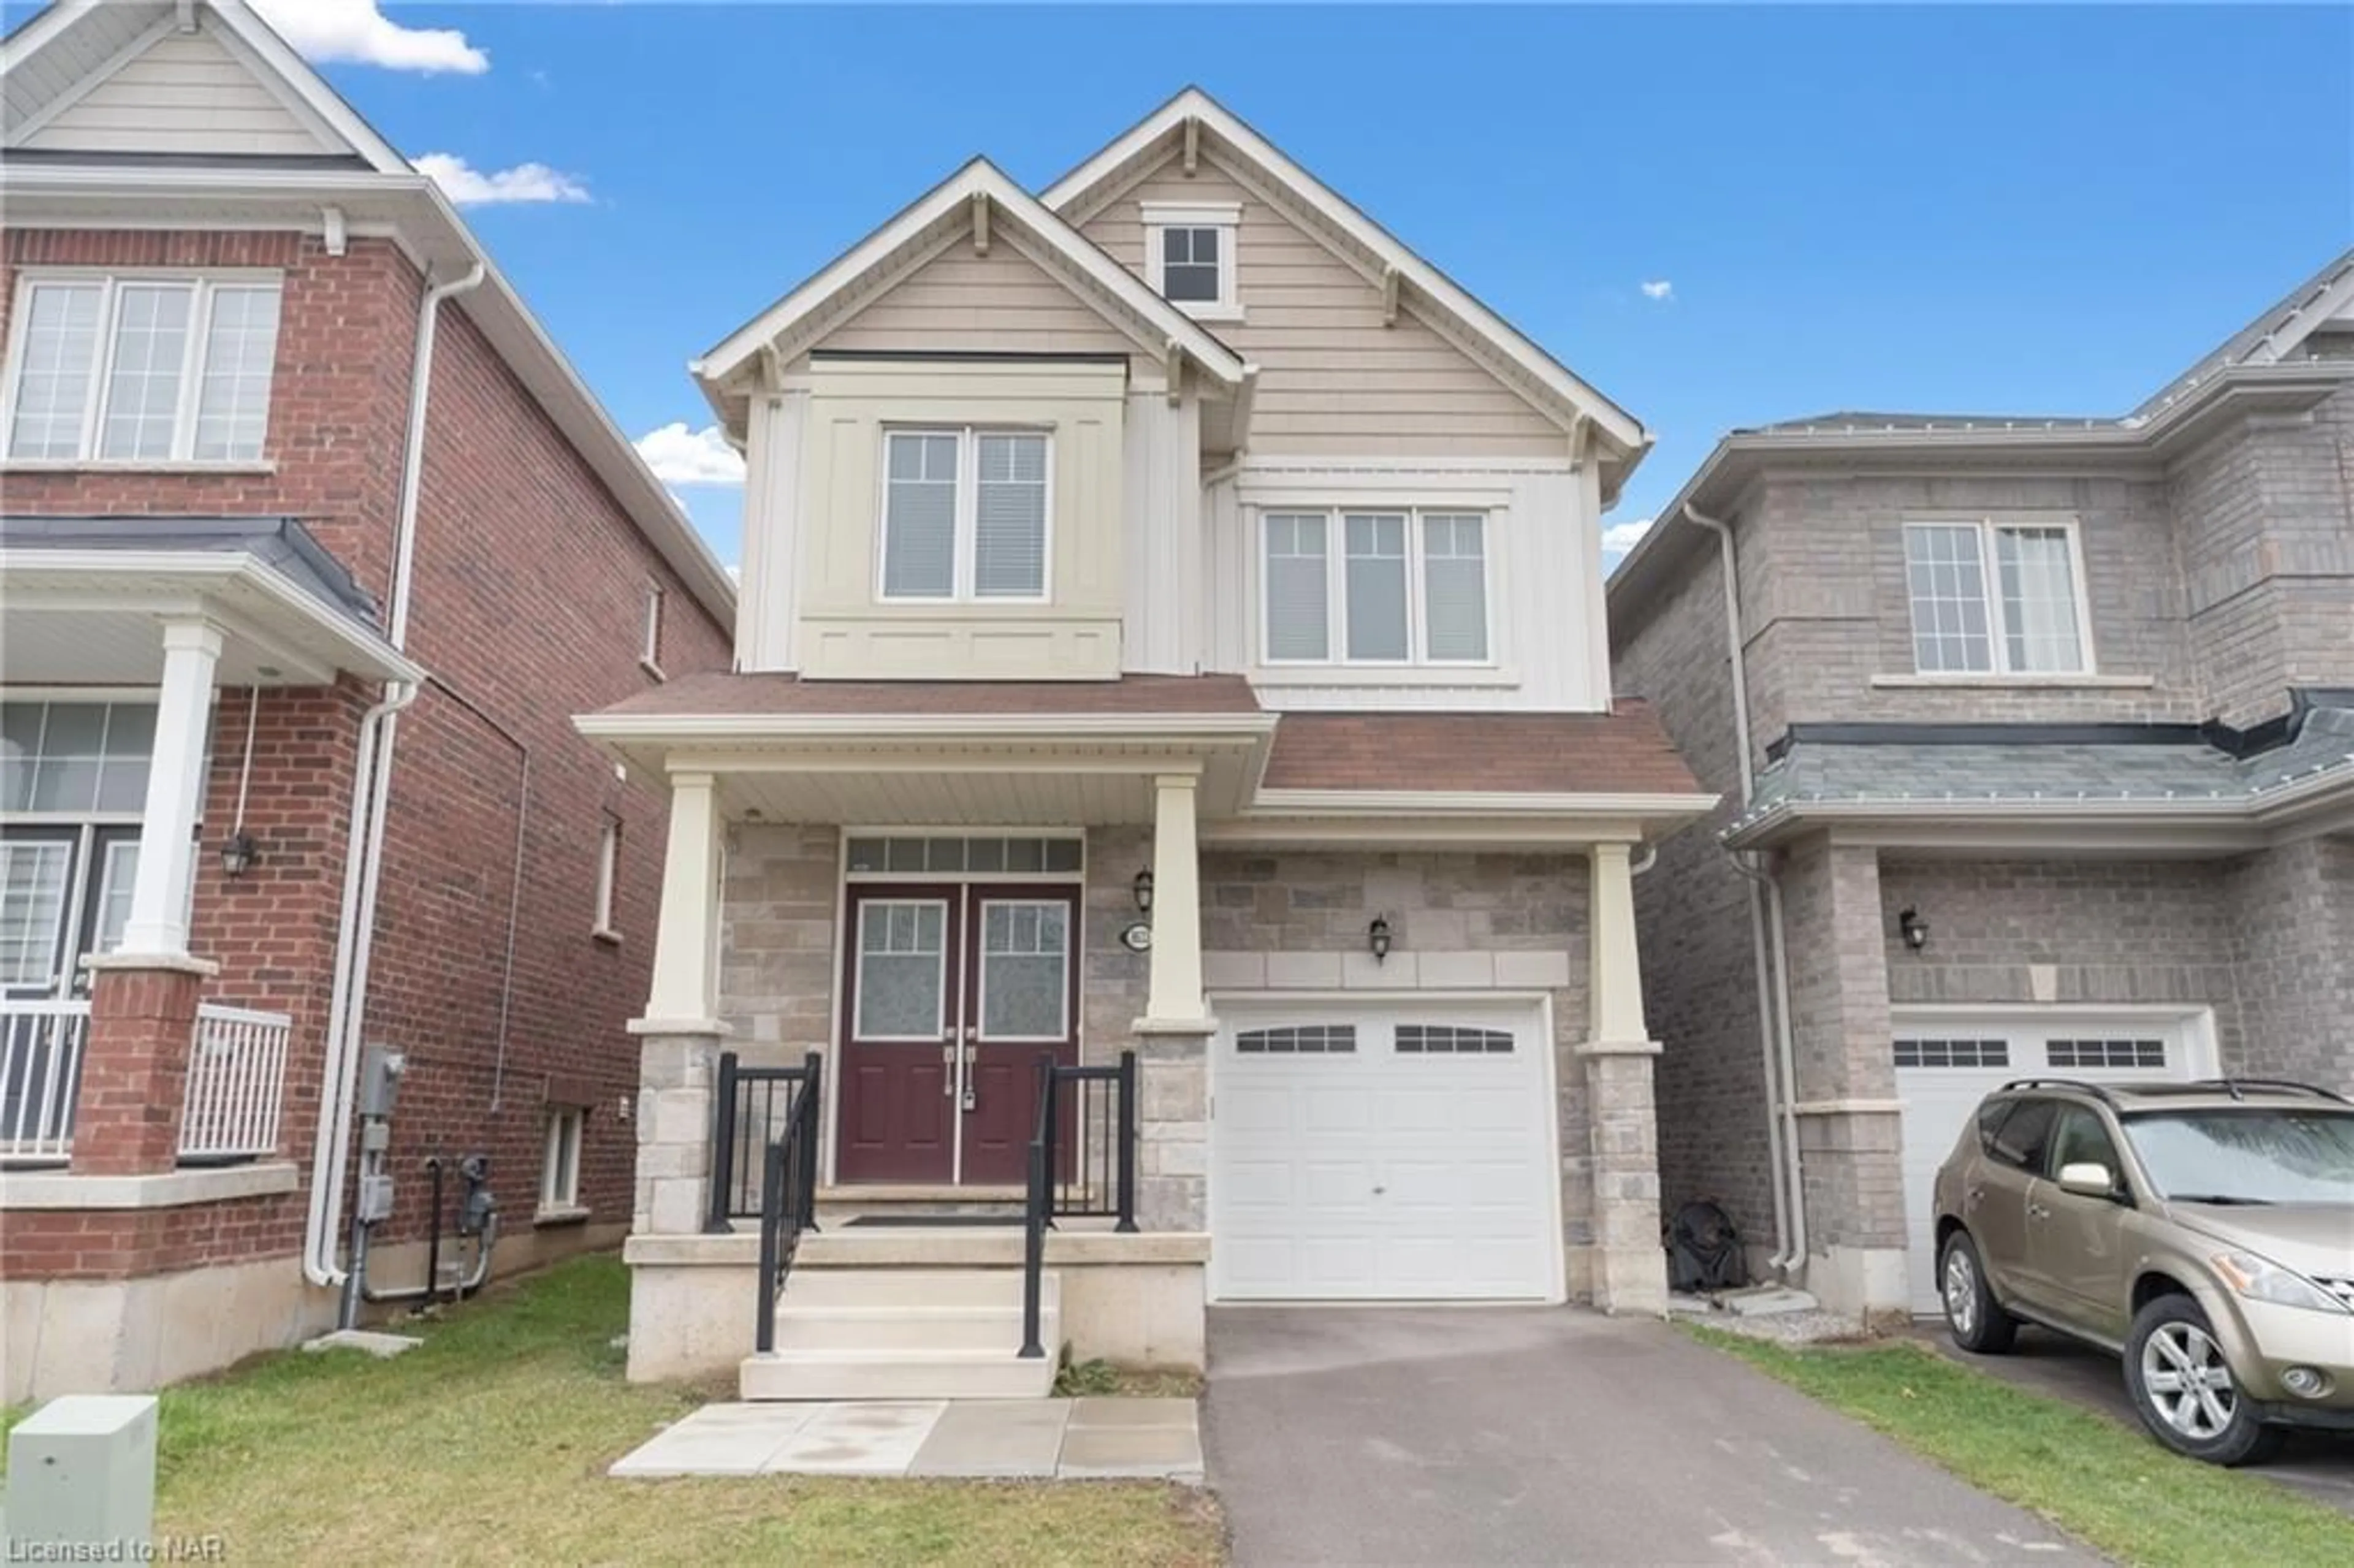 Frontside or backside of a home for 8633 Sourgum Ave, Niagara Falls Ontario L2H 3S1